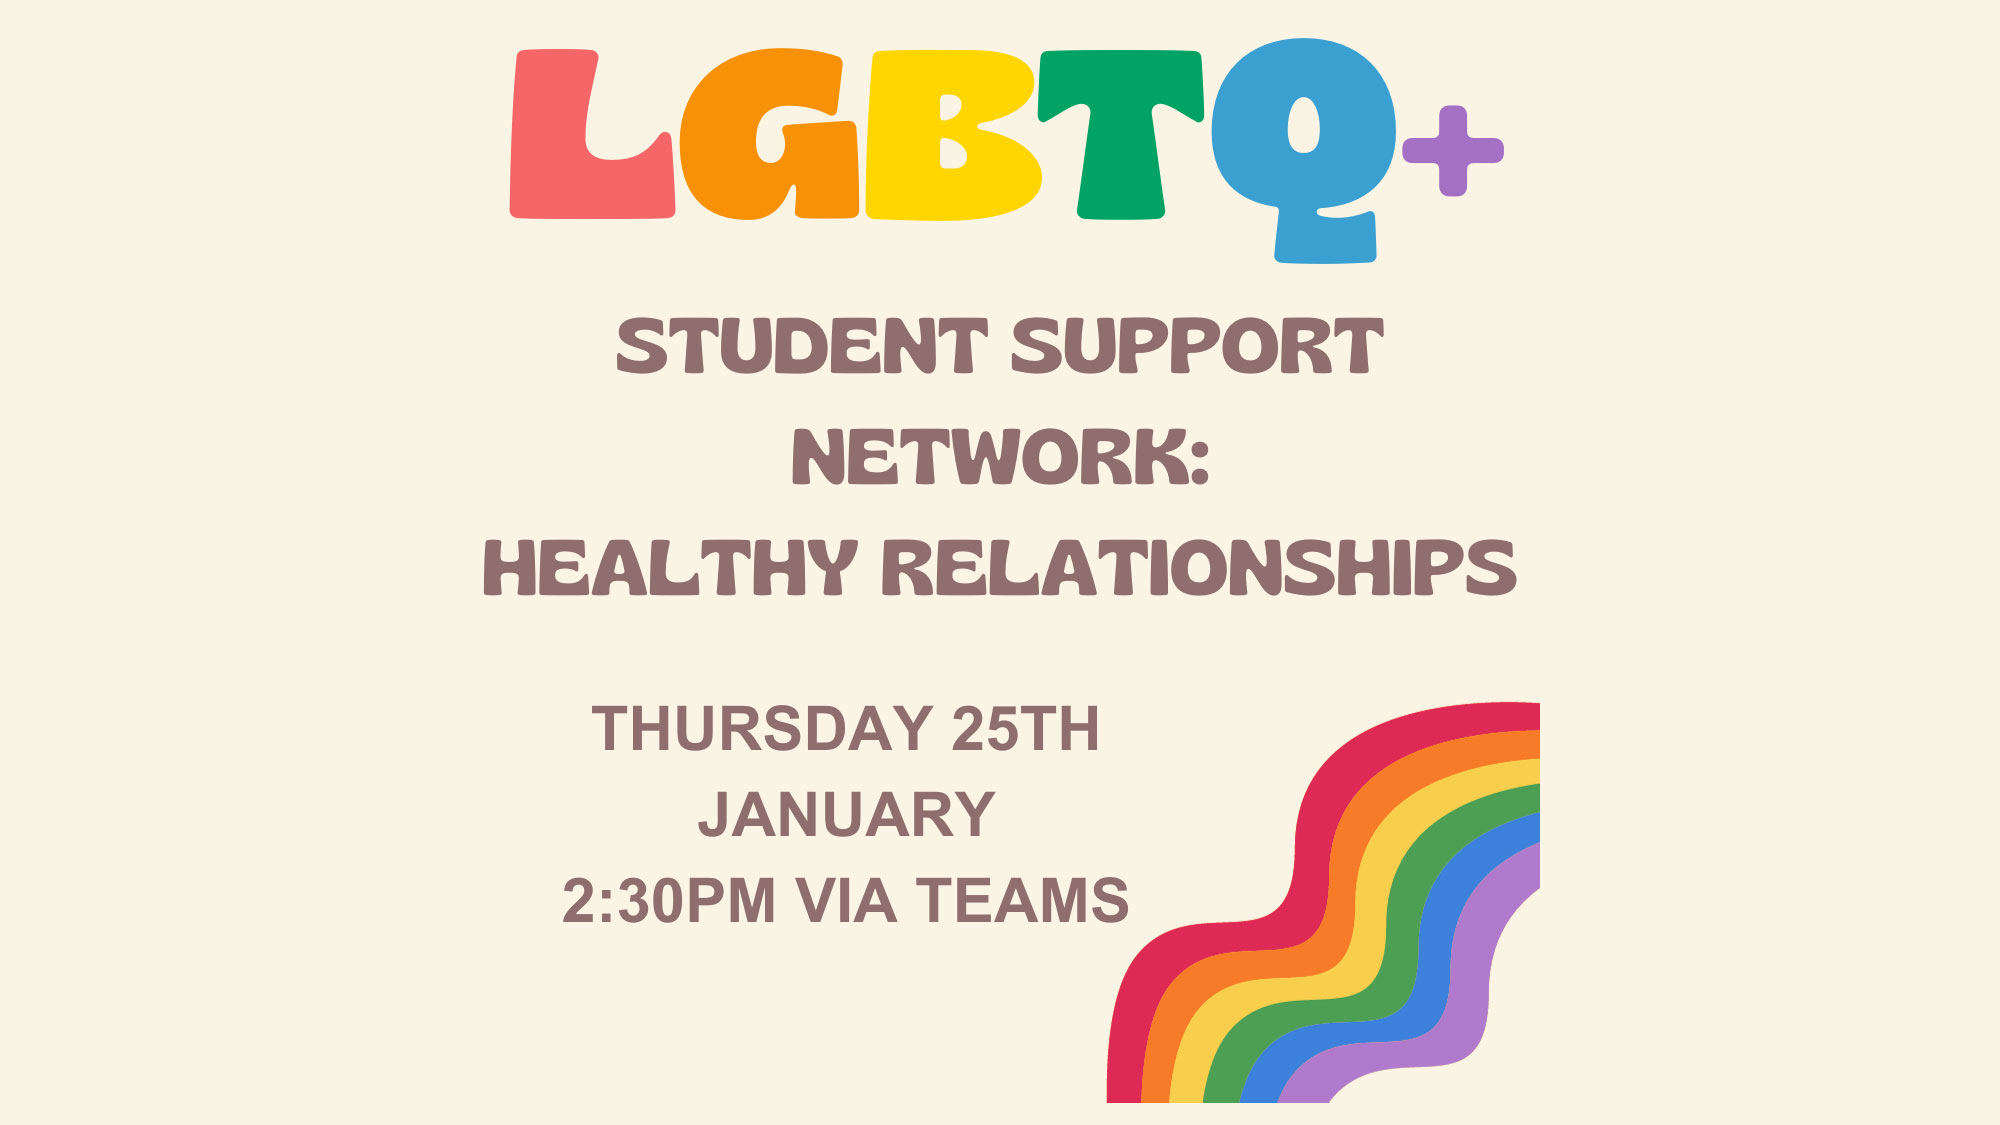 LGBTQ+ Student Support Network: Healthy Relationships